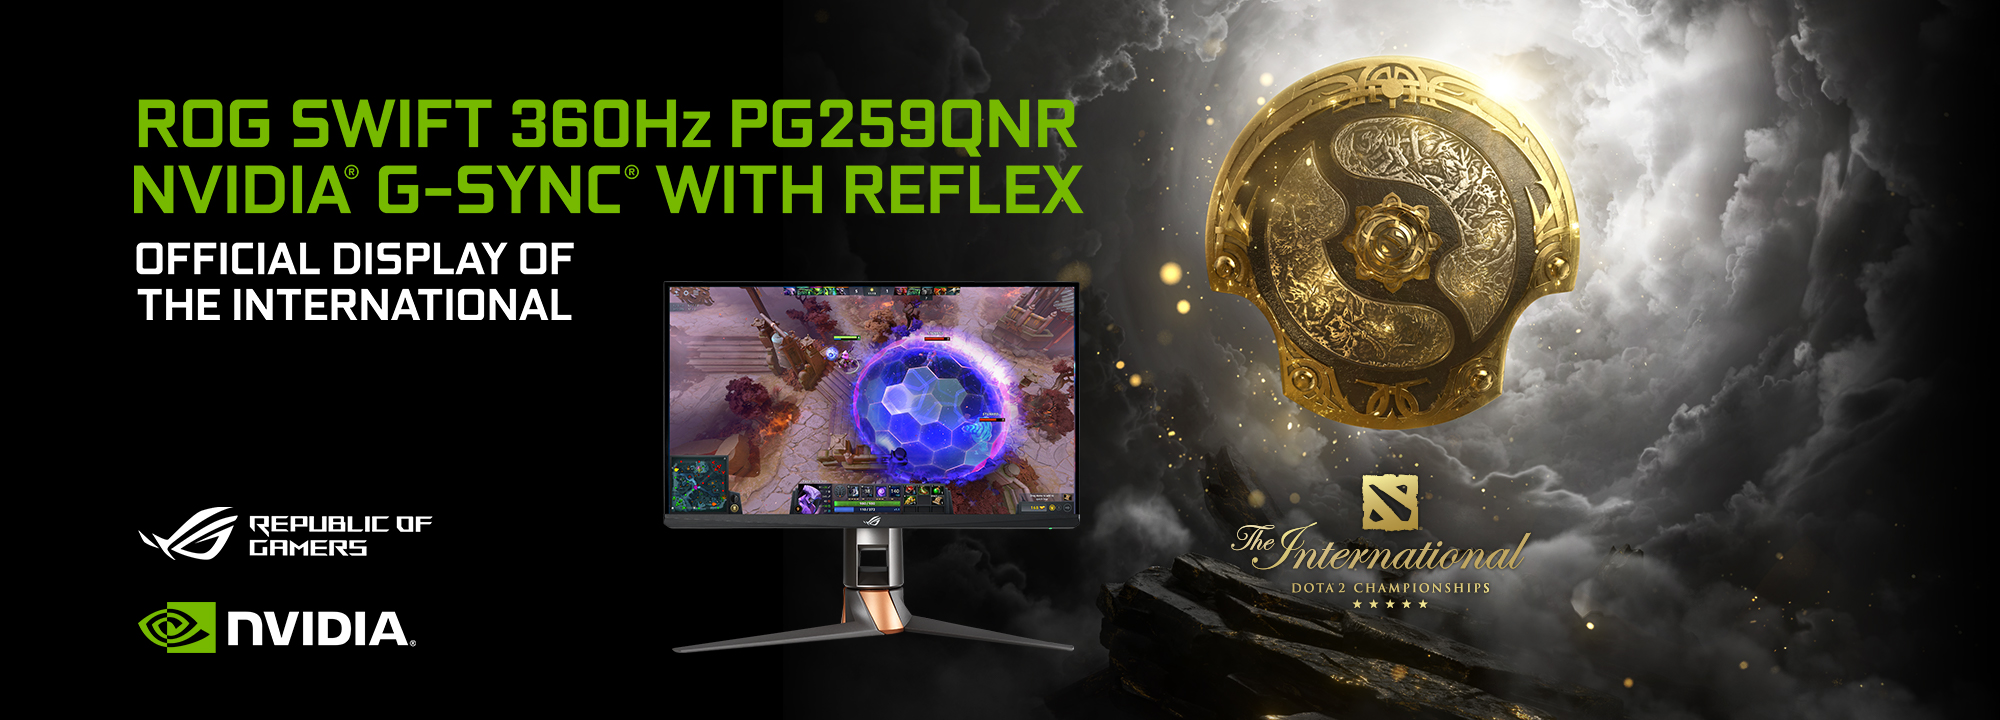 THE ROG SWIFT 360HZ PG259QNR HELPS PROS RAISE THEIR GAME AT THE INTERNATIONAL 10